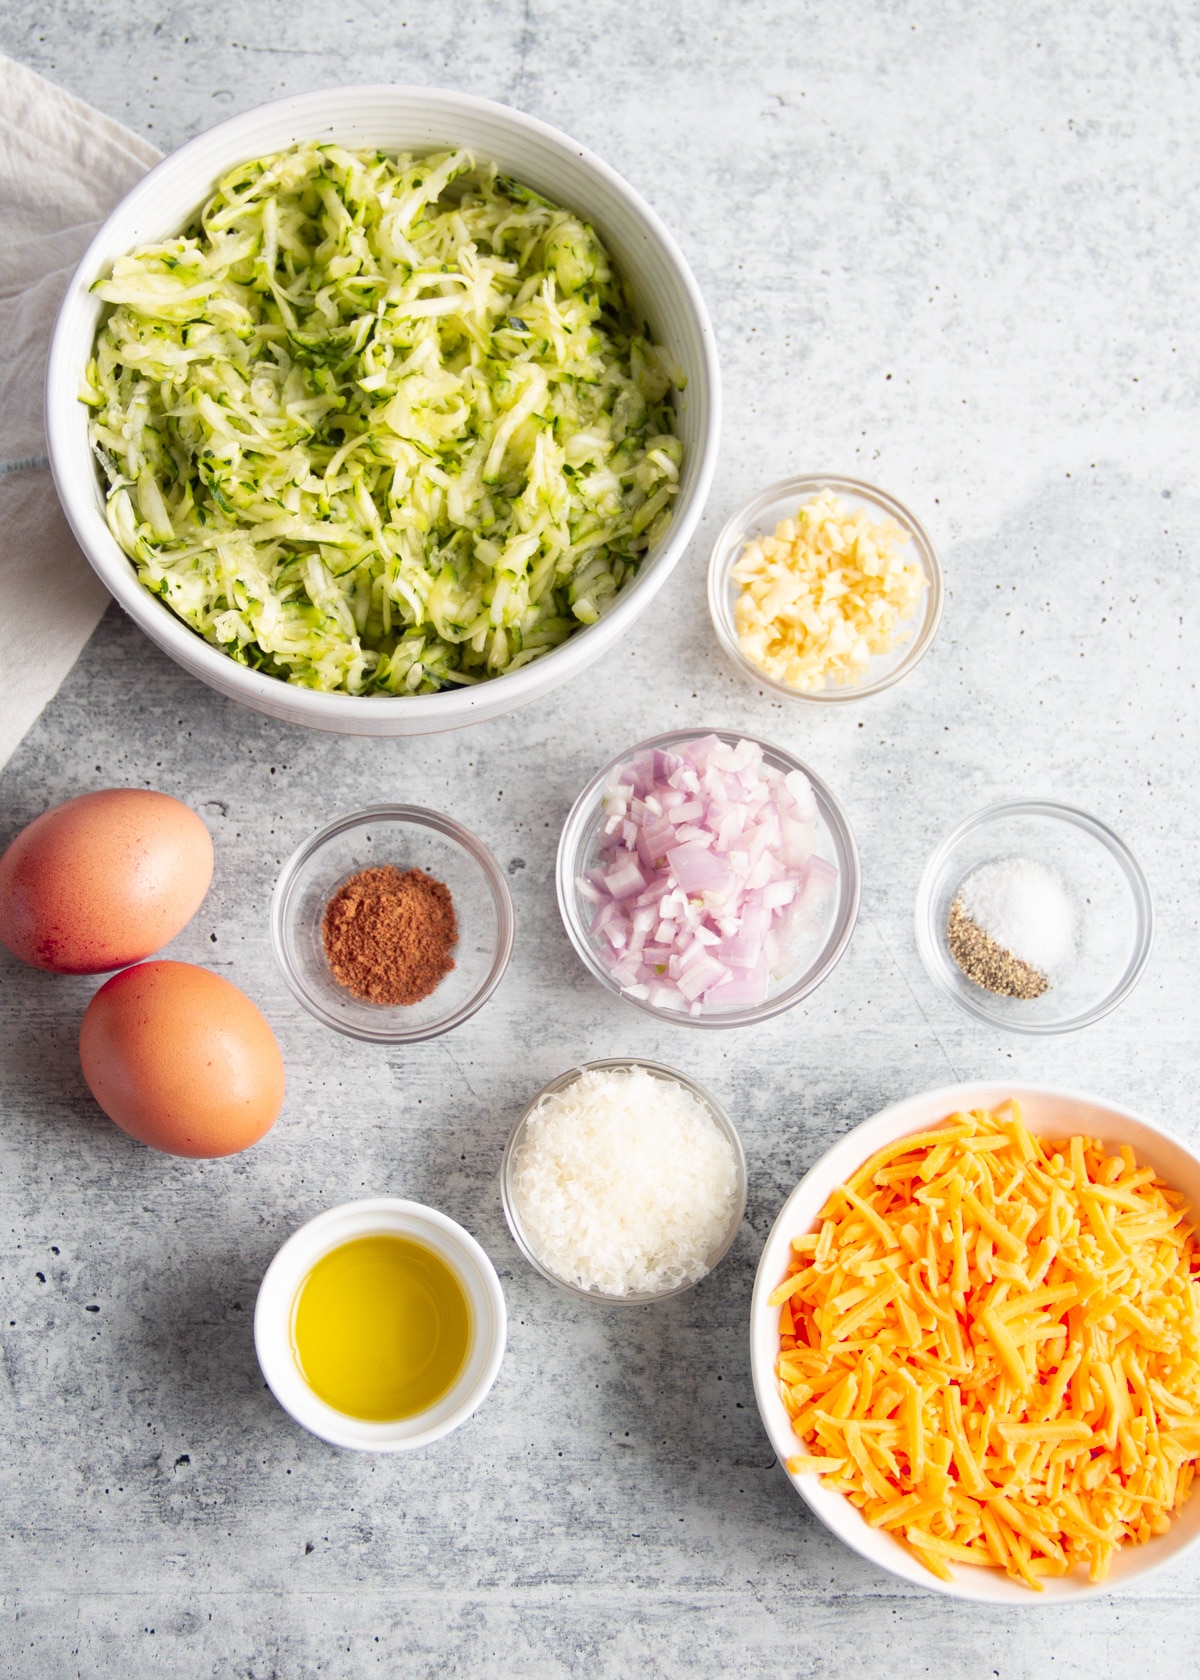 Image of all the ingredients of the cheesy zucchini casserole.